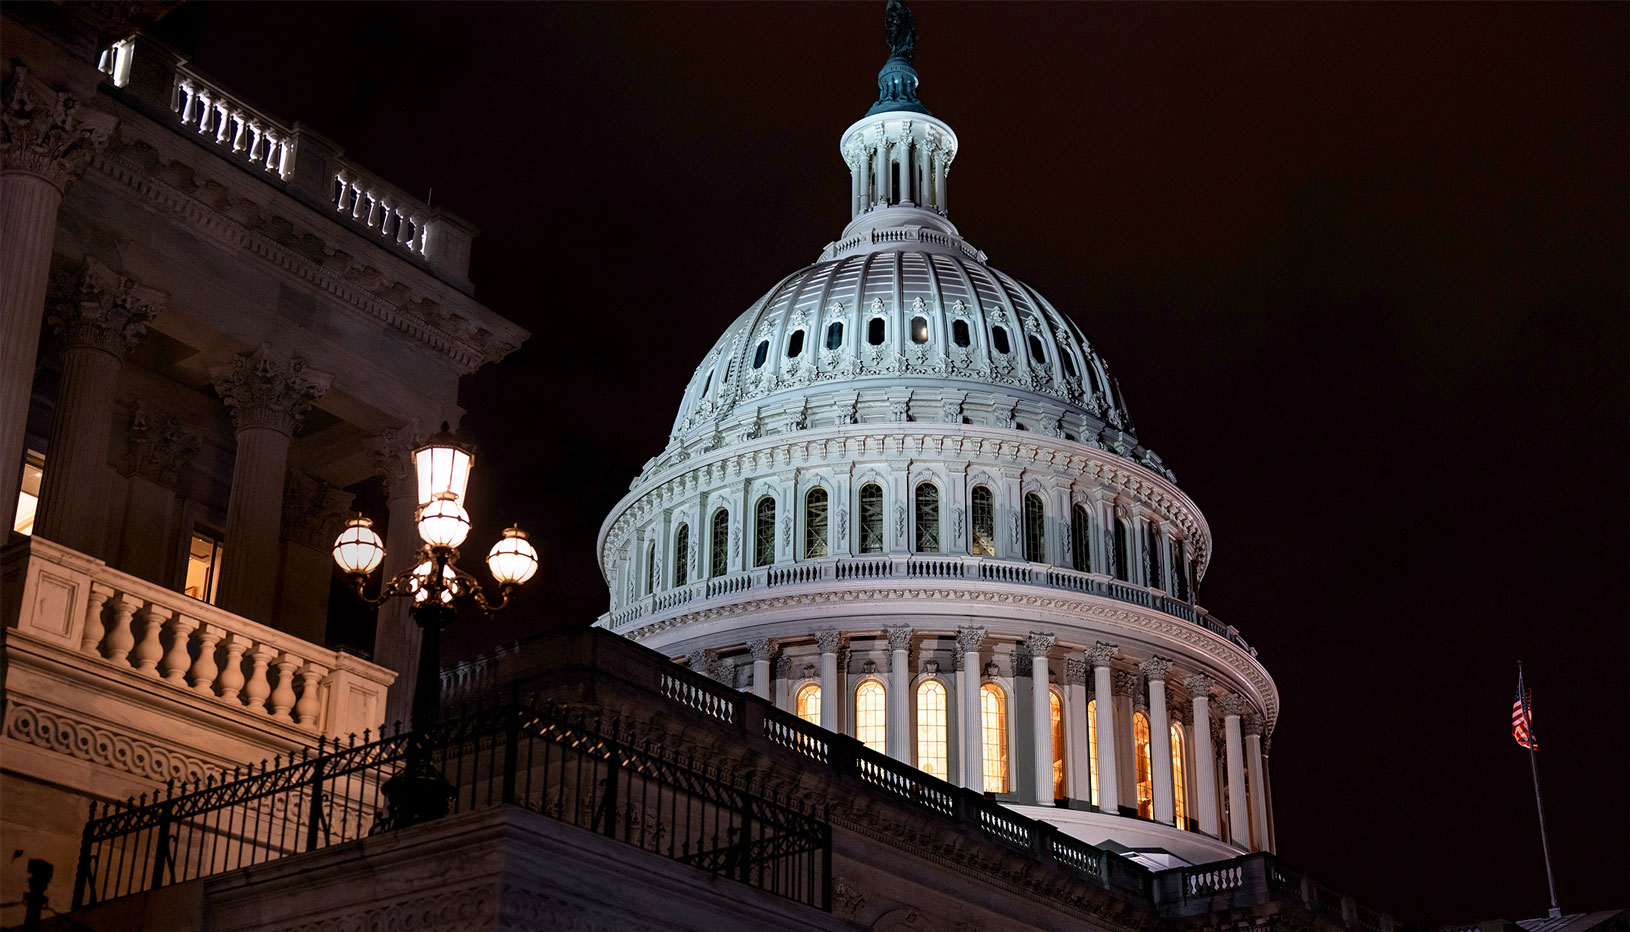 The dome of the U.S. Capitol building seen at night